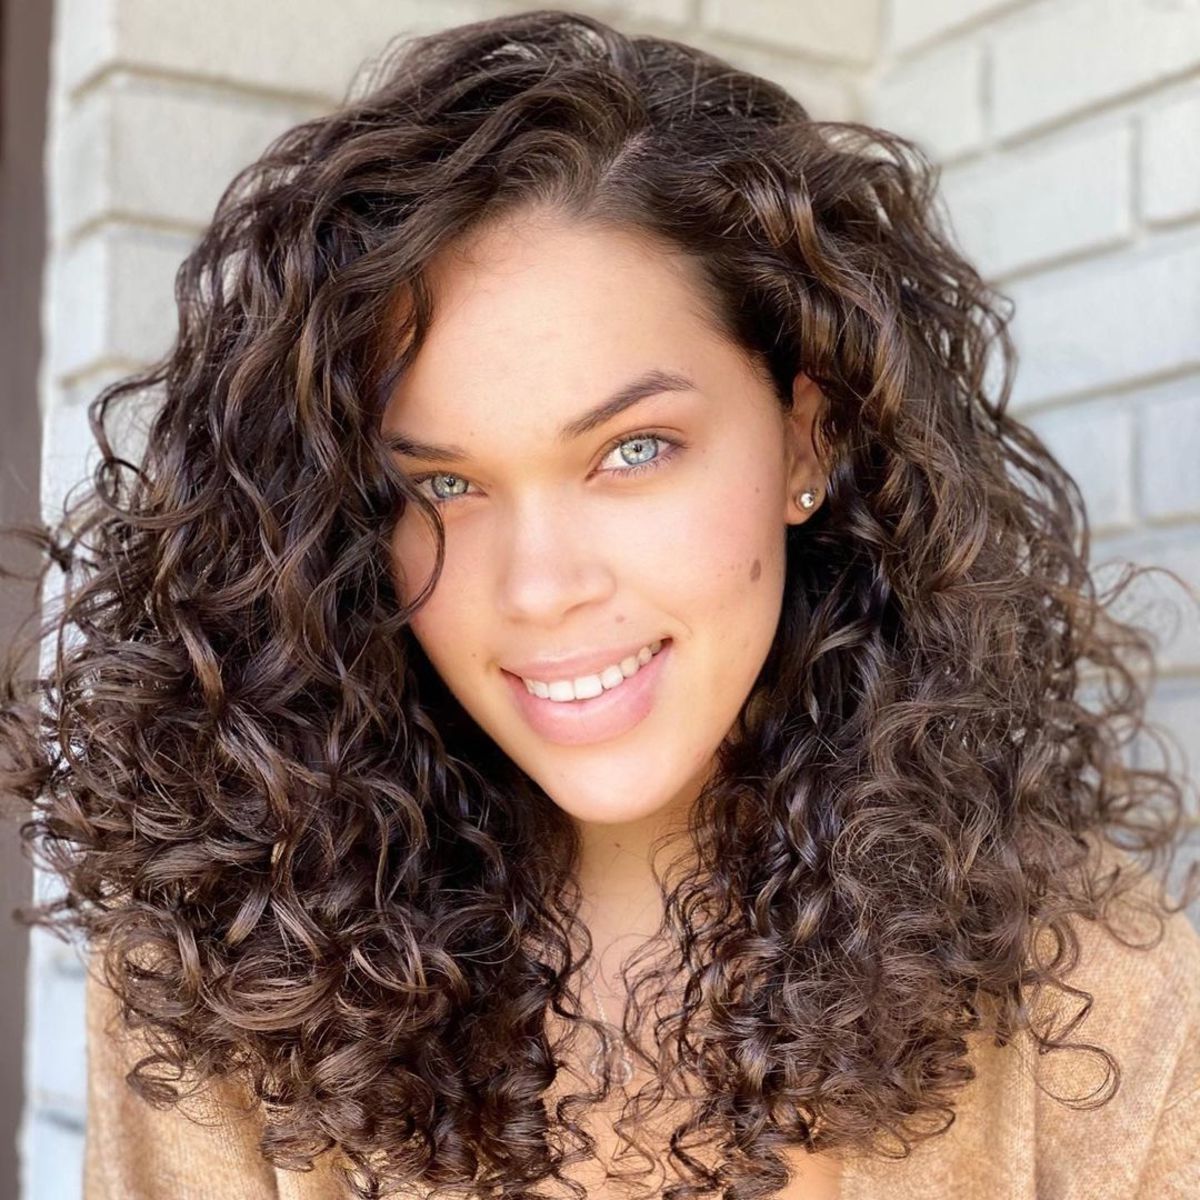 62 Best Shoulder Length Curly Hair Cuts & Styles In 2022 With Recent Layered Curly Medium Length Hairstyles (View 4 of 20)